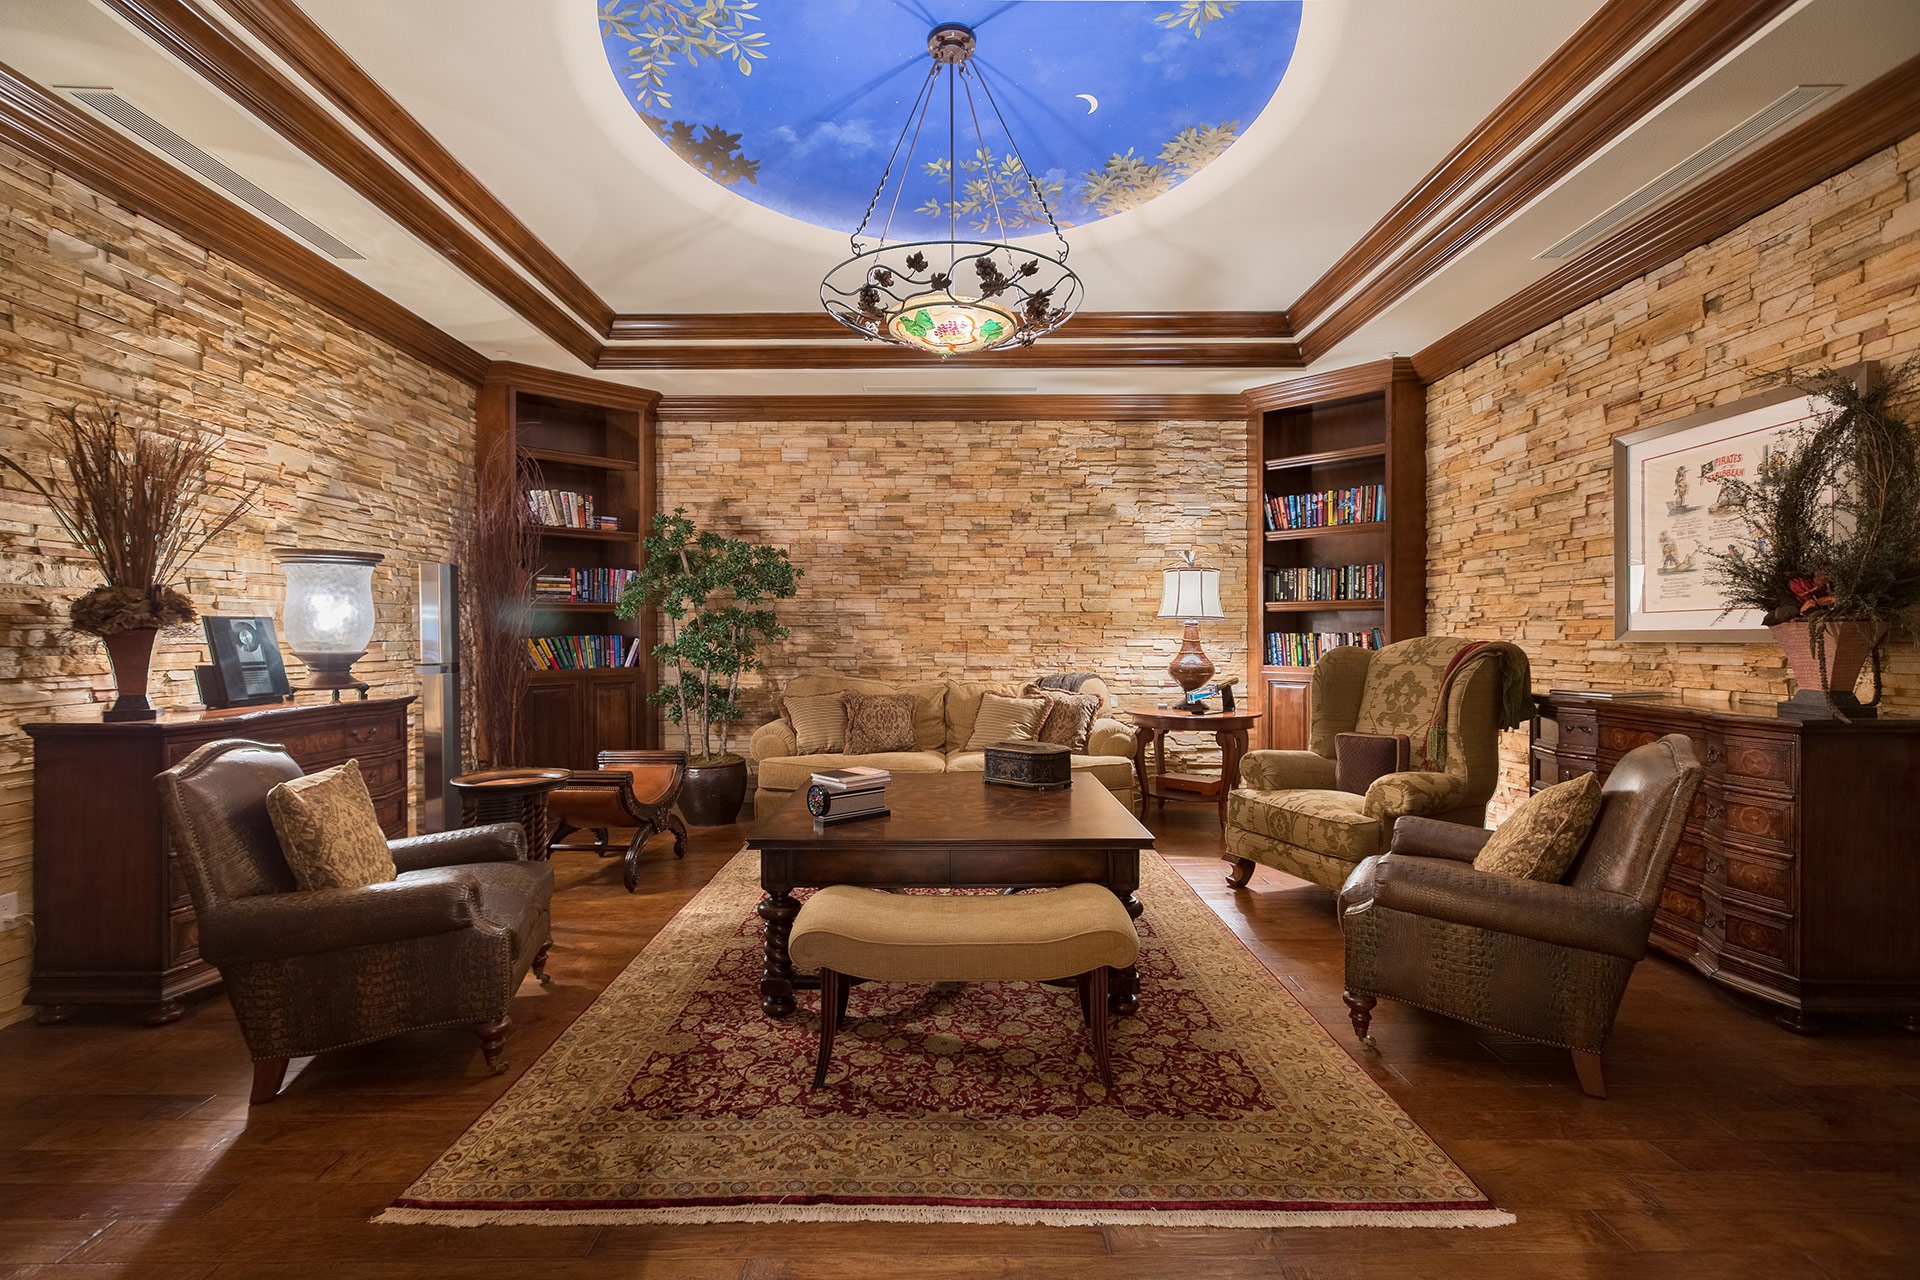 A dark, moody study with a recessed, blue and gold painted recessed medallion and chandelier on the ceiling, slate stone walls, 3 chairs, and dark-wood furniture.